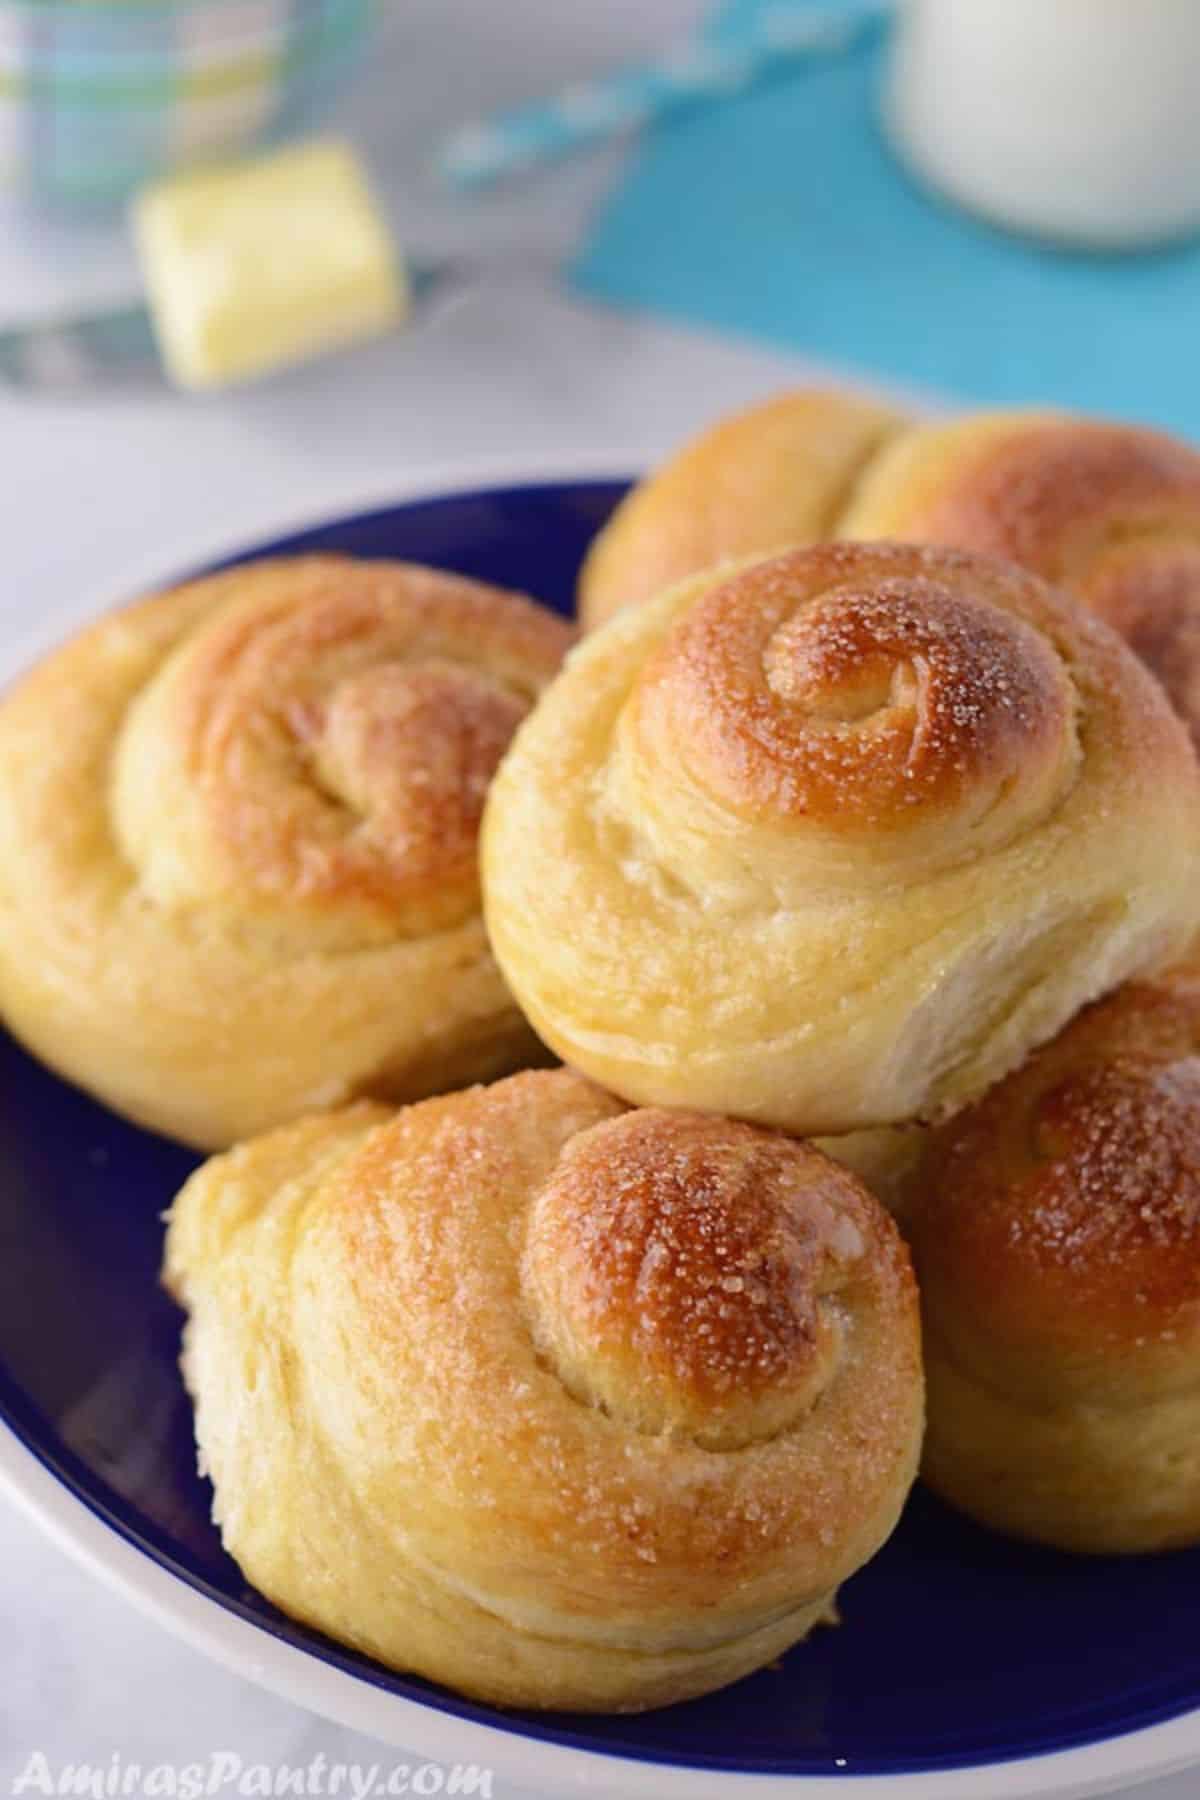 Stacked sweet bread rolls on a blue plate.